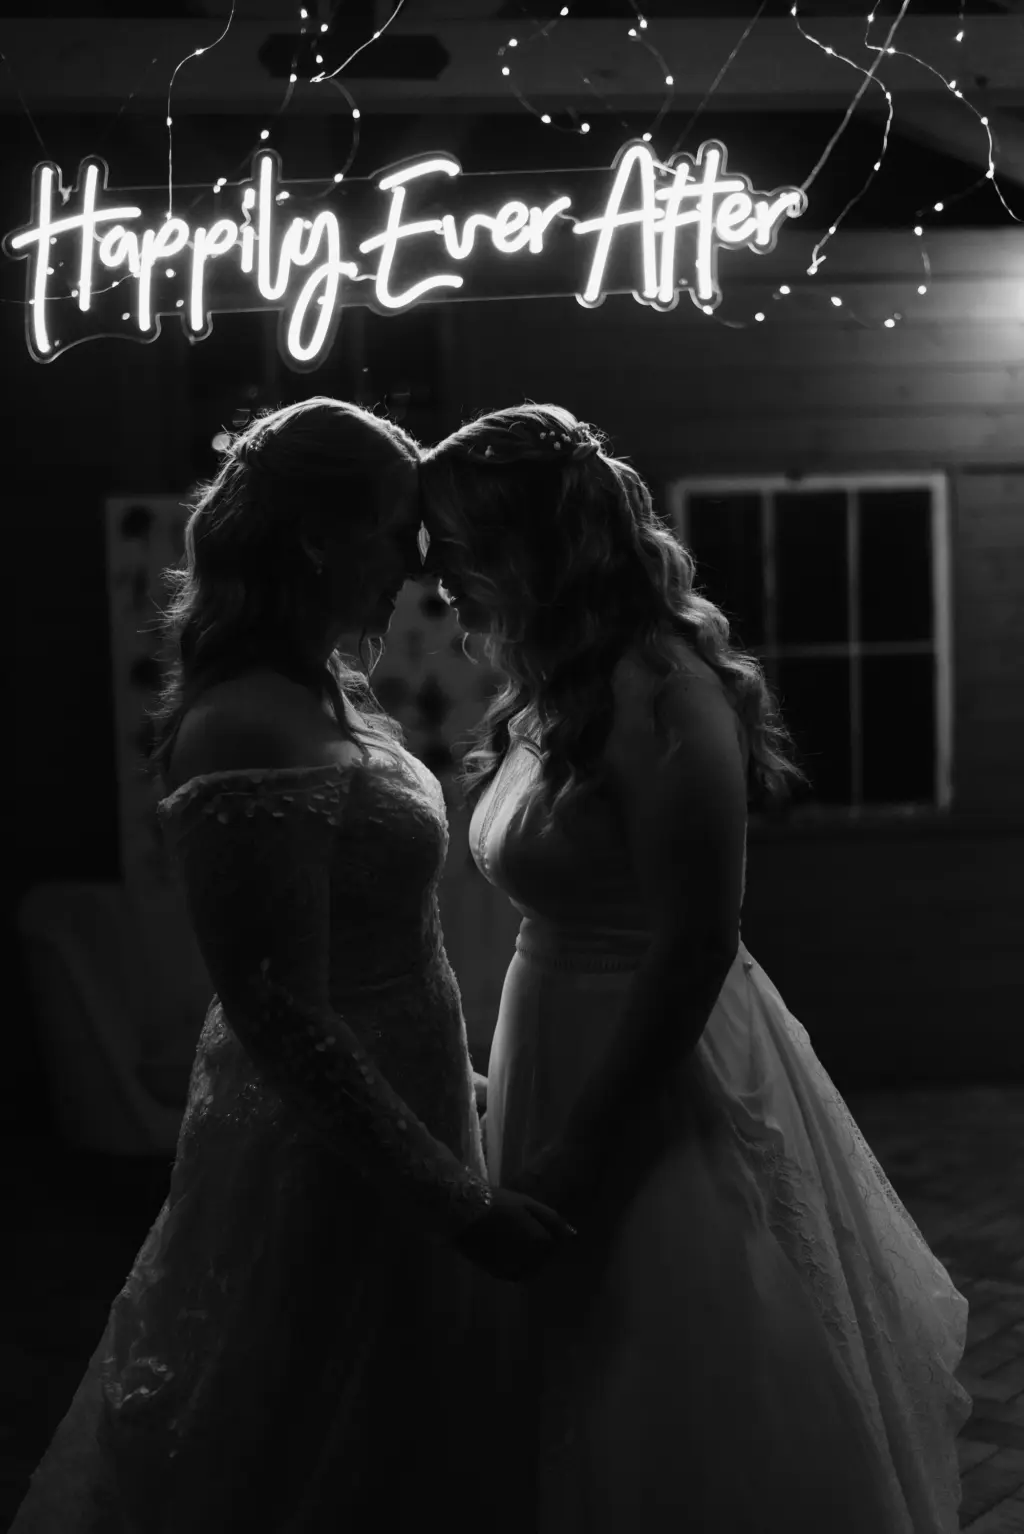 Black and White Wedding Portrait Same Sex Couple with Neon Marry Me Sign | Tampa Wedding Venue Mill Pond Estate | Planner Stephany Perry Events